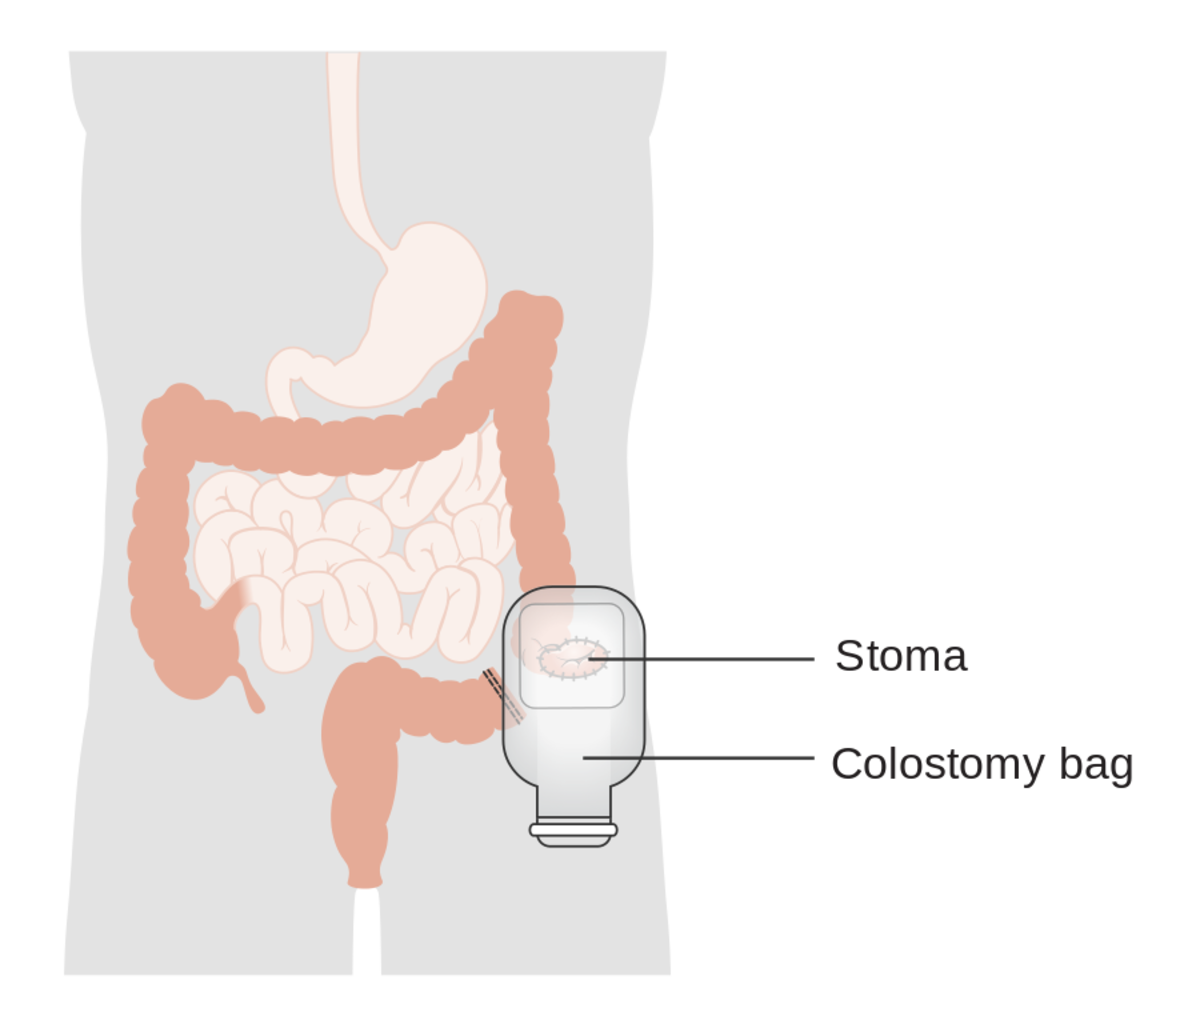 Managing a Colostomy After Colon Surgery: My Experience